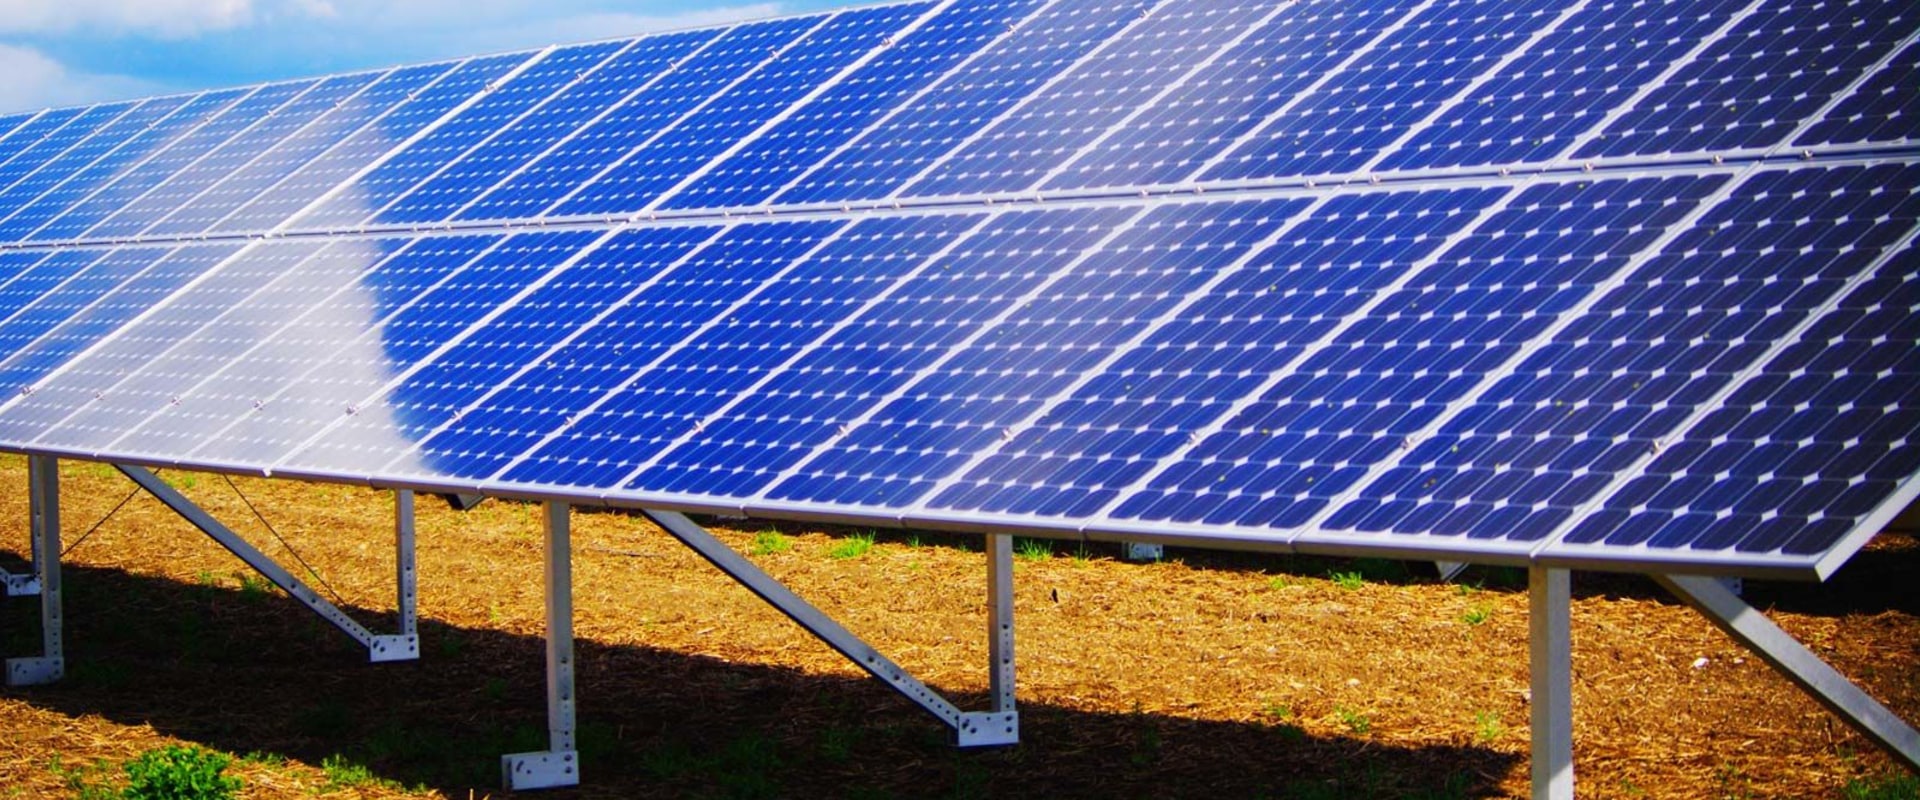 What is solar energy and how is it used?